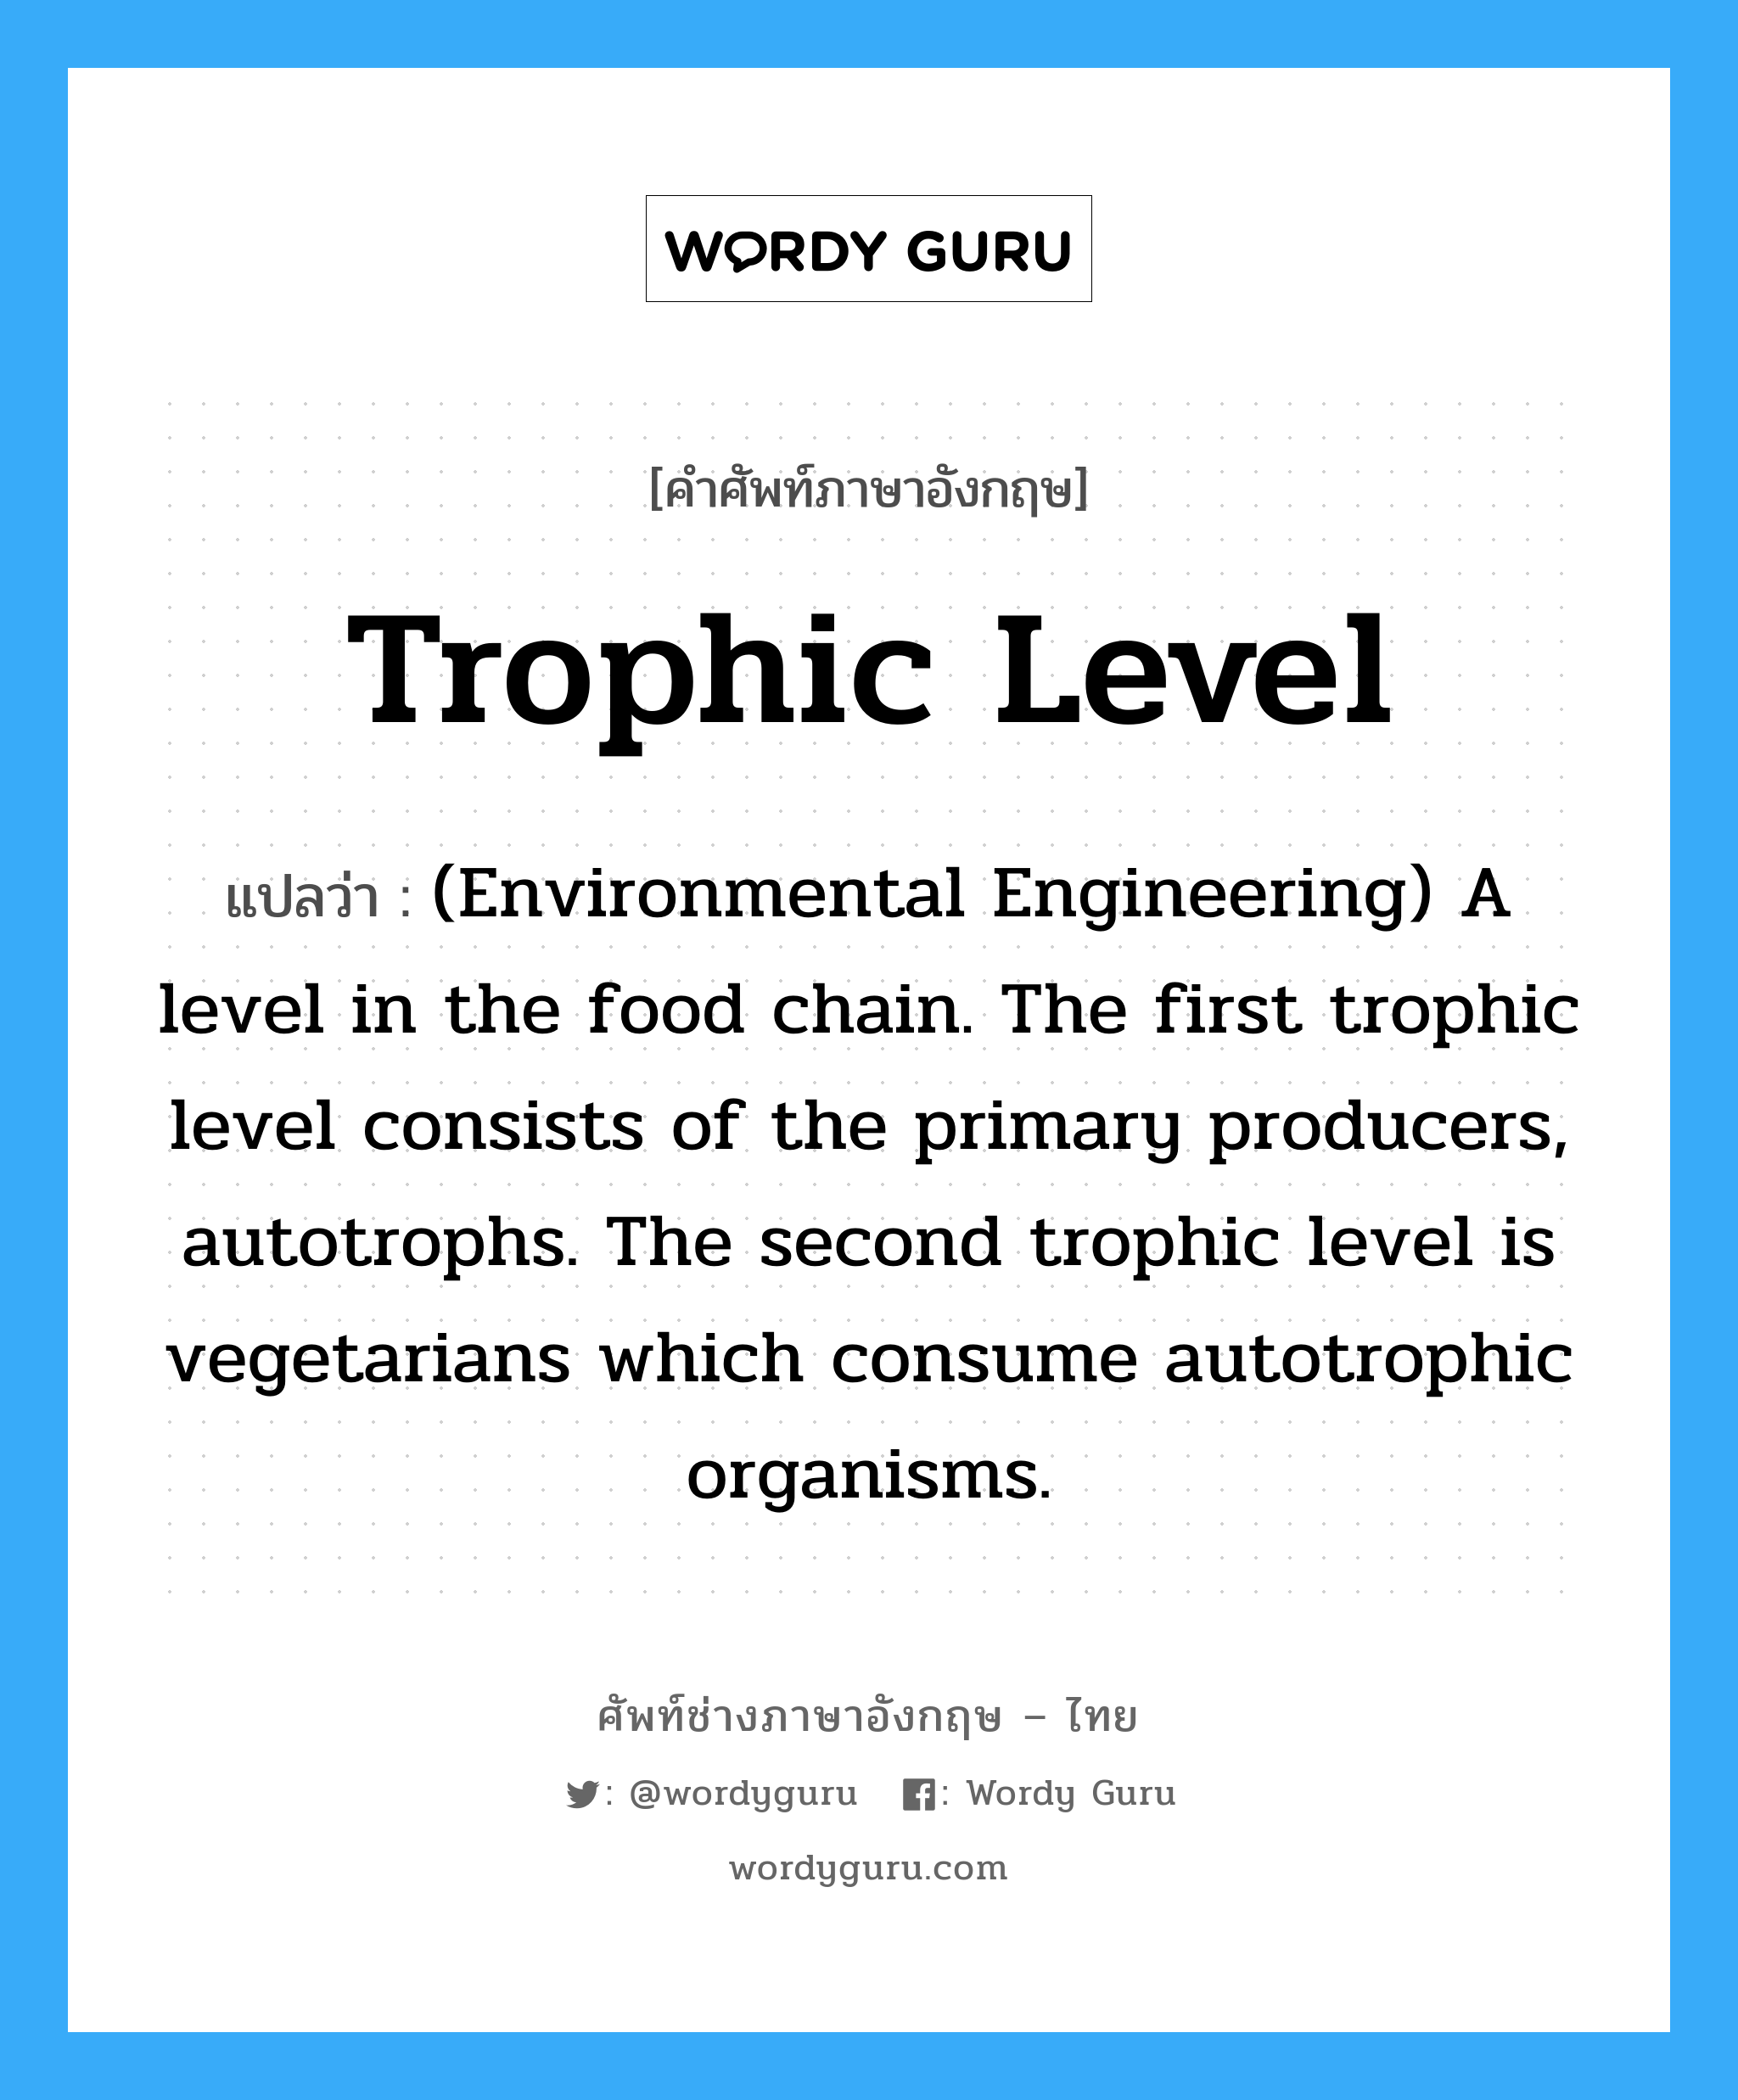 Trophic level แปลว่า?, คำศัพท์ช่างภาษาอังกฤษ - ไทย Trophic level คำศัพท์ภาษาอังกฤษ Trophic level แปลว่า (Environmental Engineering) A level in the food chain. The first trophic level consists of the primary producers, autotrophs. The second trophic level is vegetarians which consume autotrophic organisms.